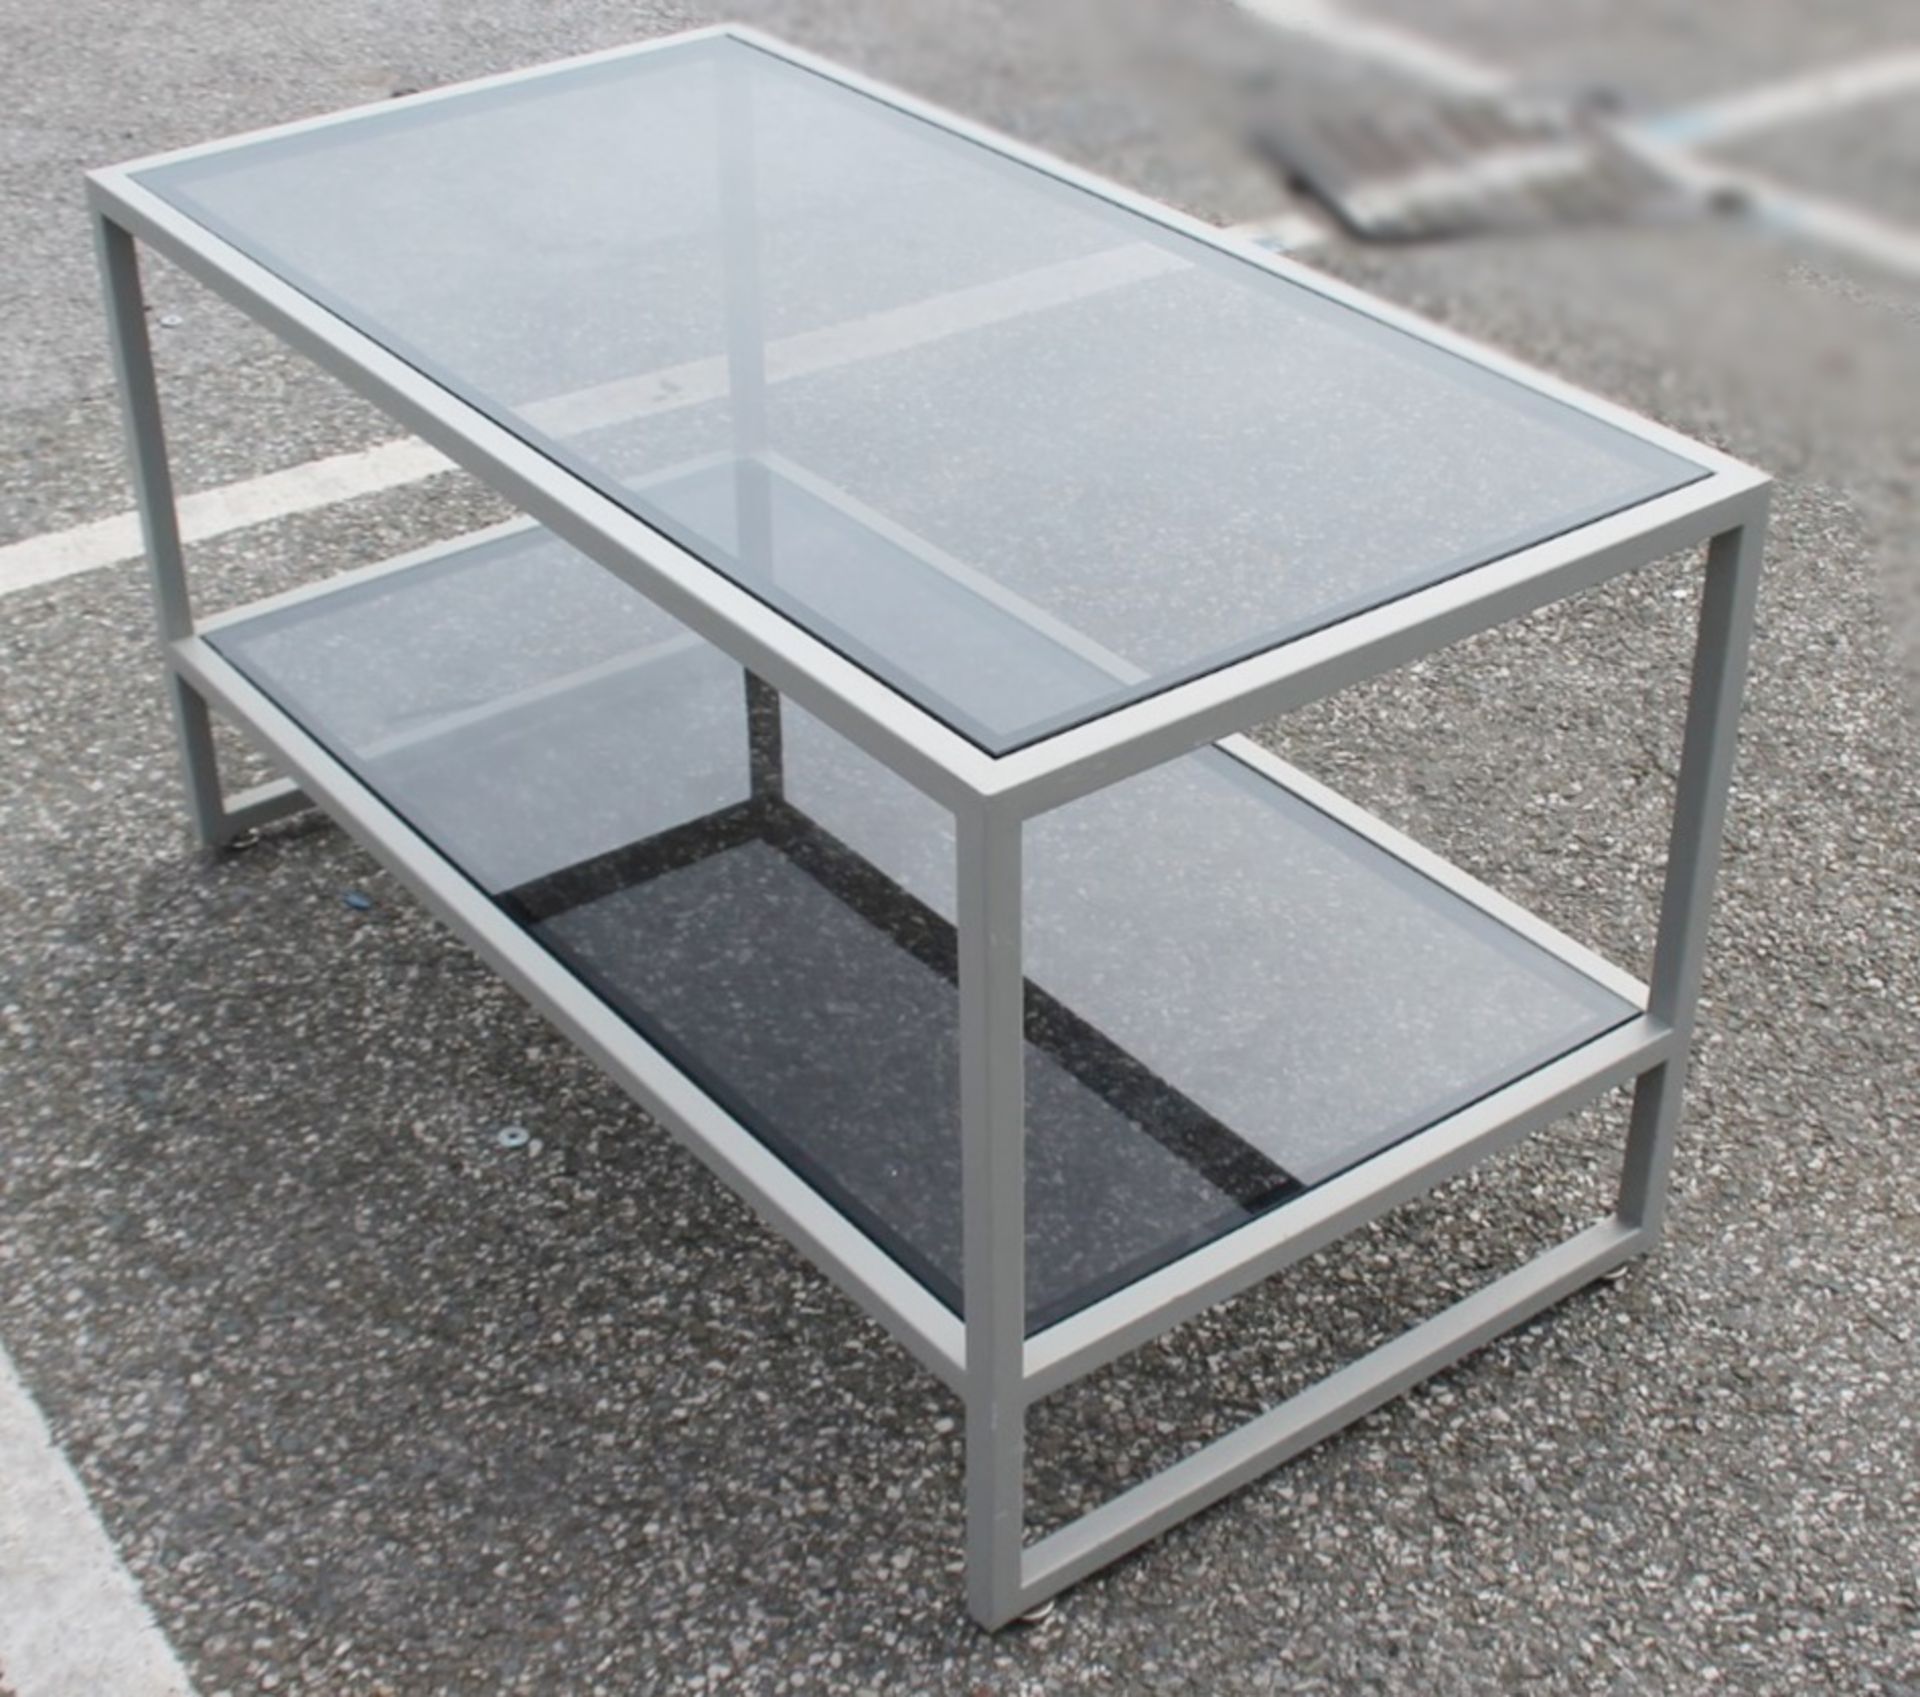 A Pair Of Commercial Display Tables With Tinted Glass Tops And Under-shelves - Image 2 of 3